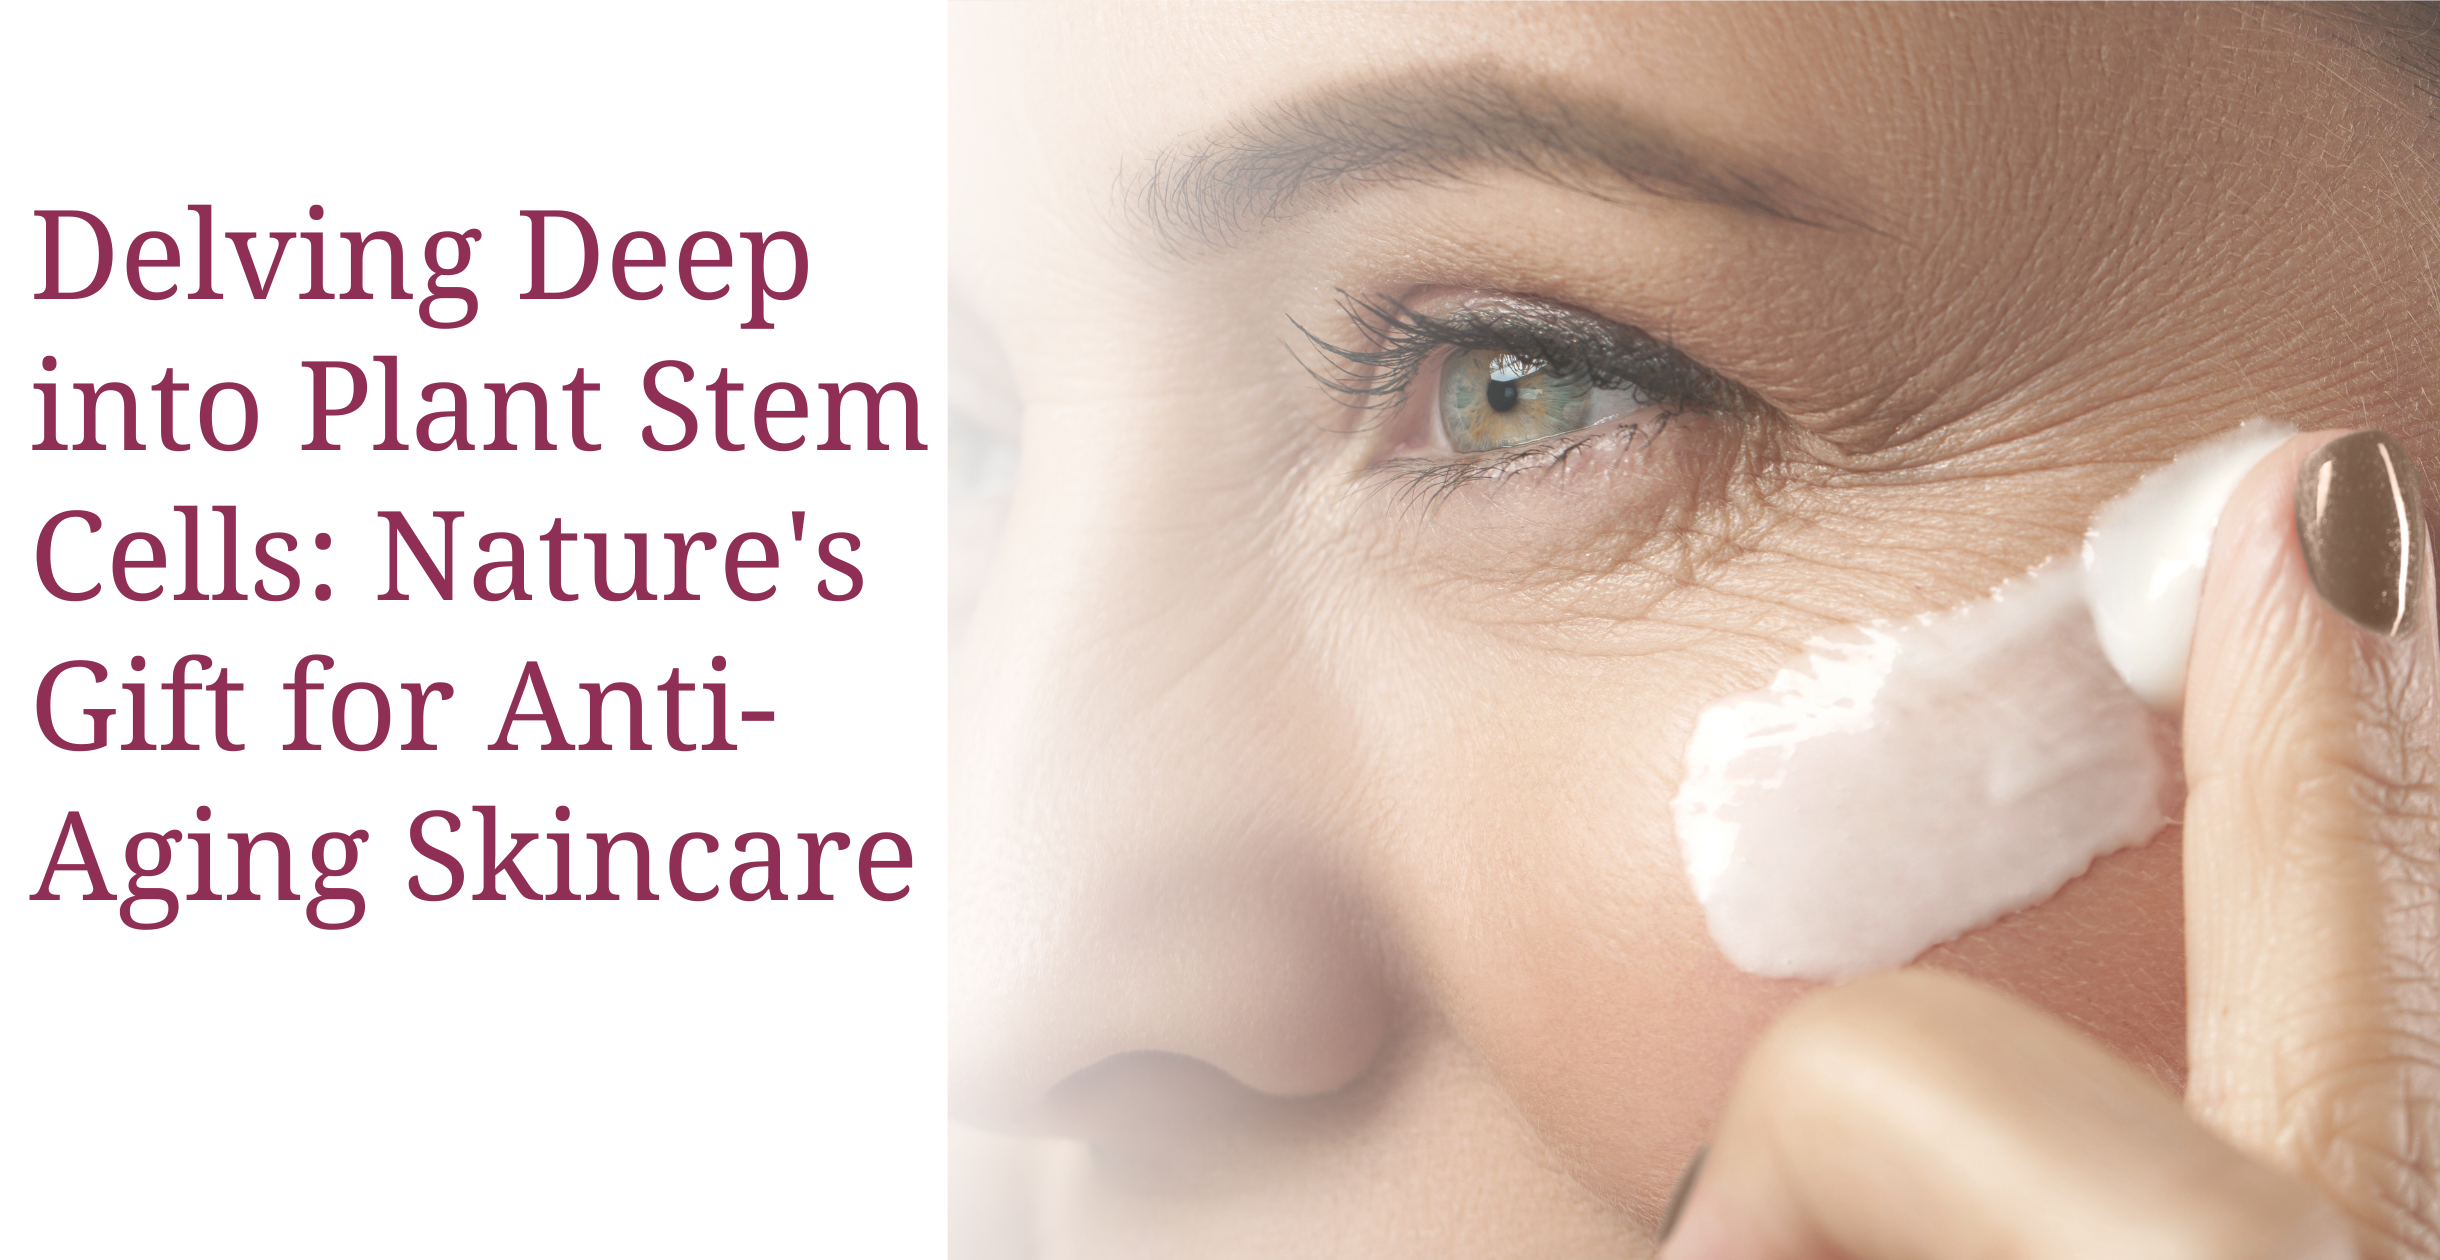 Delving Deep into Plant Stem Cells: Nature's Gift for Anti-Aging Skincare